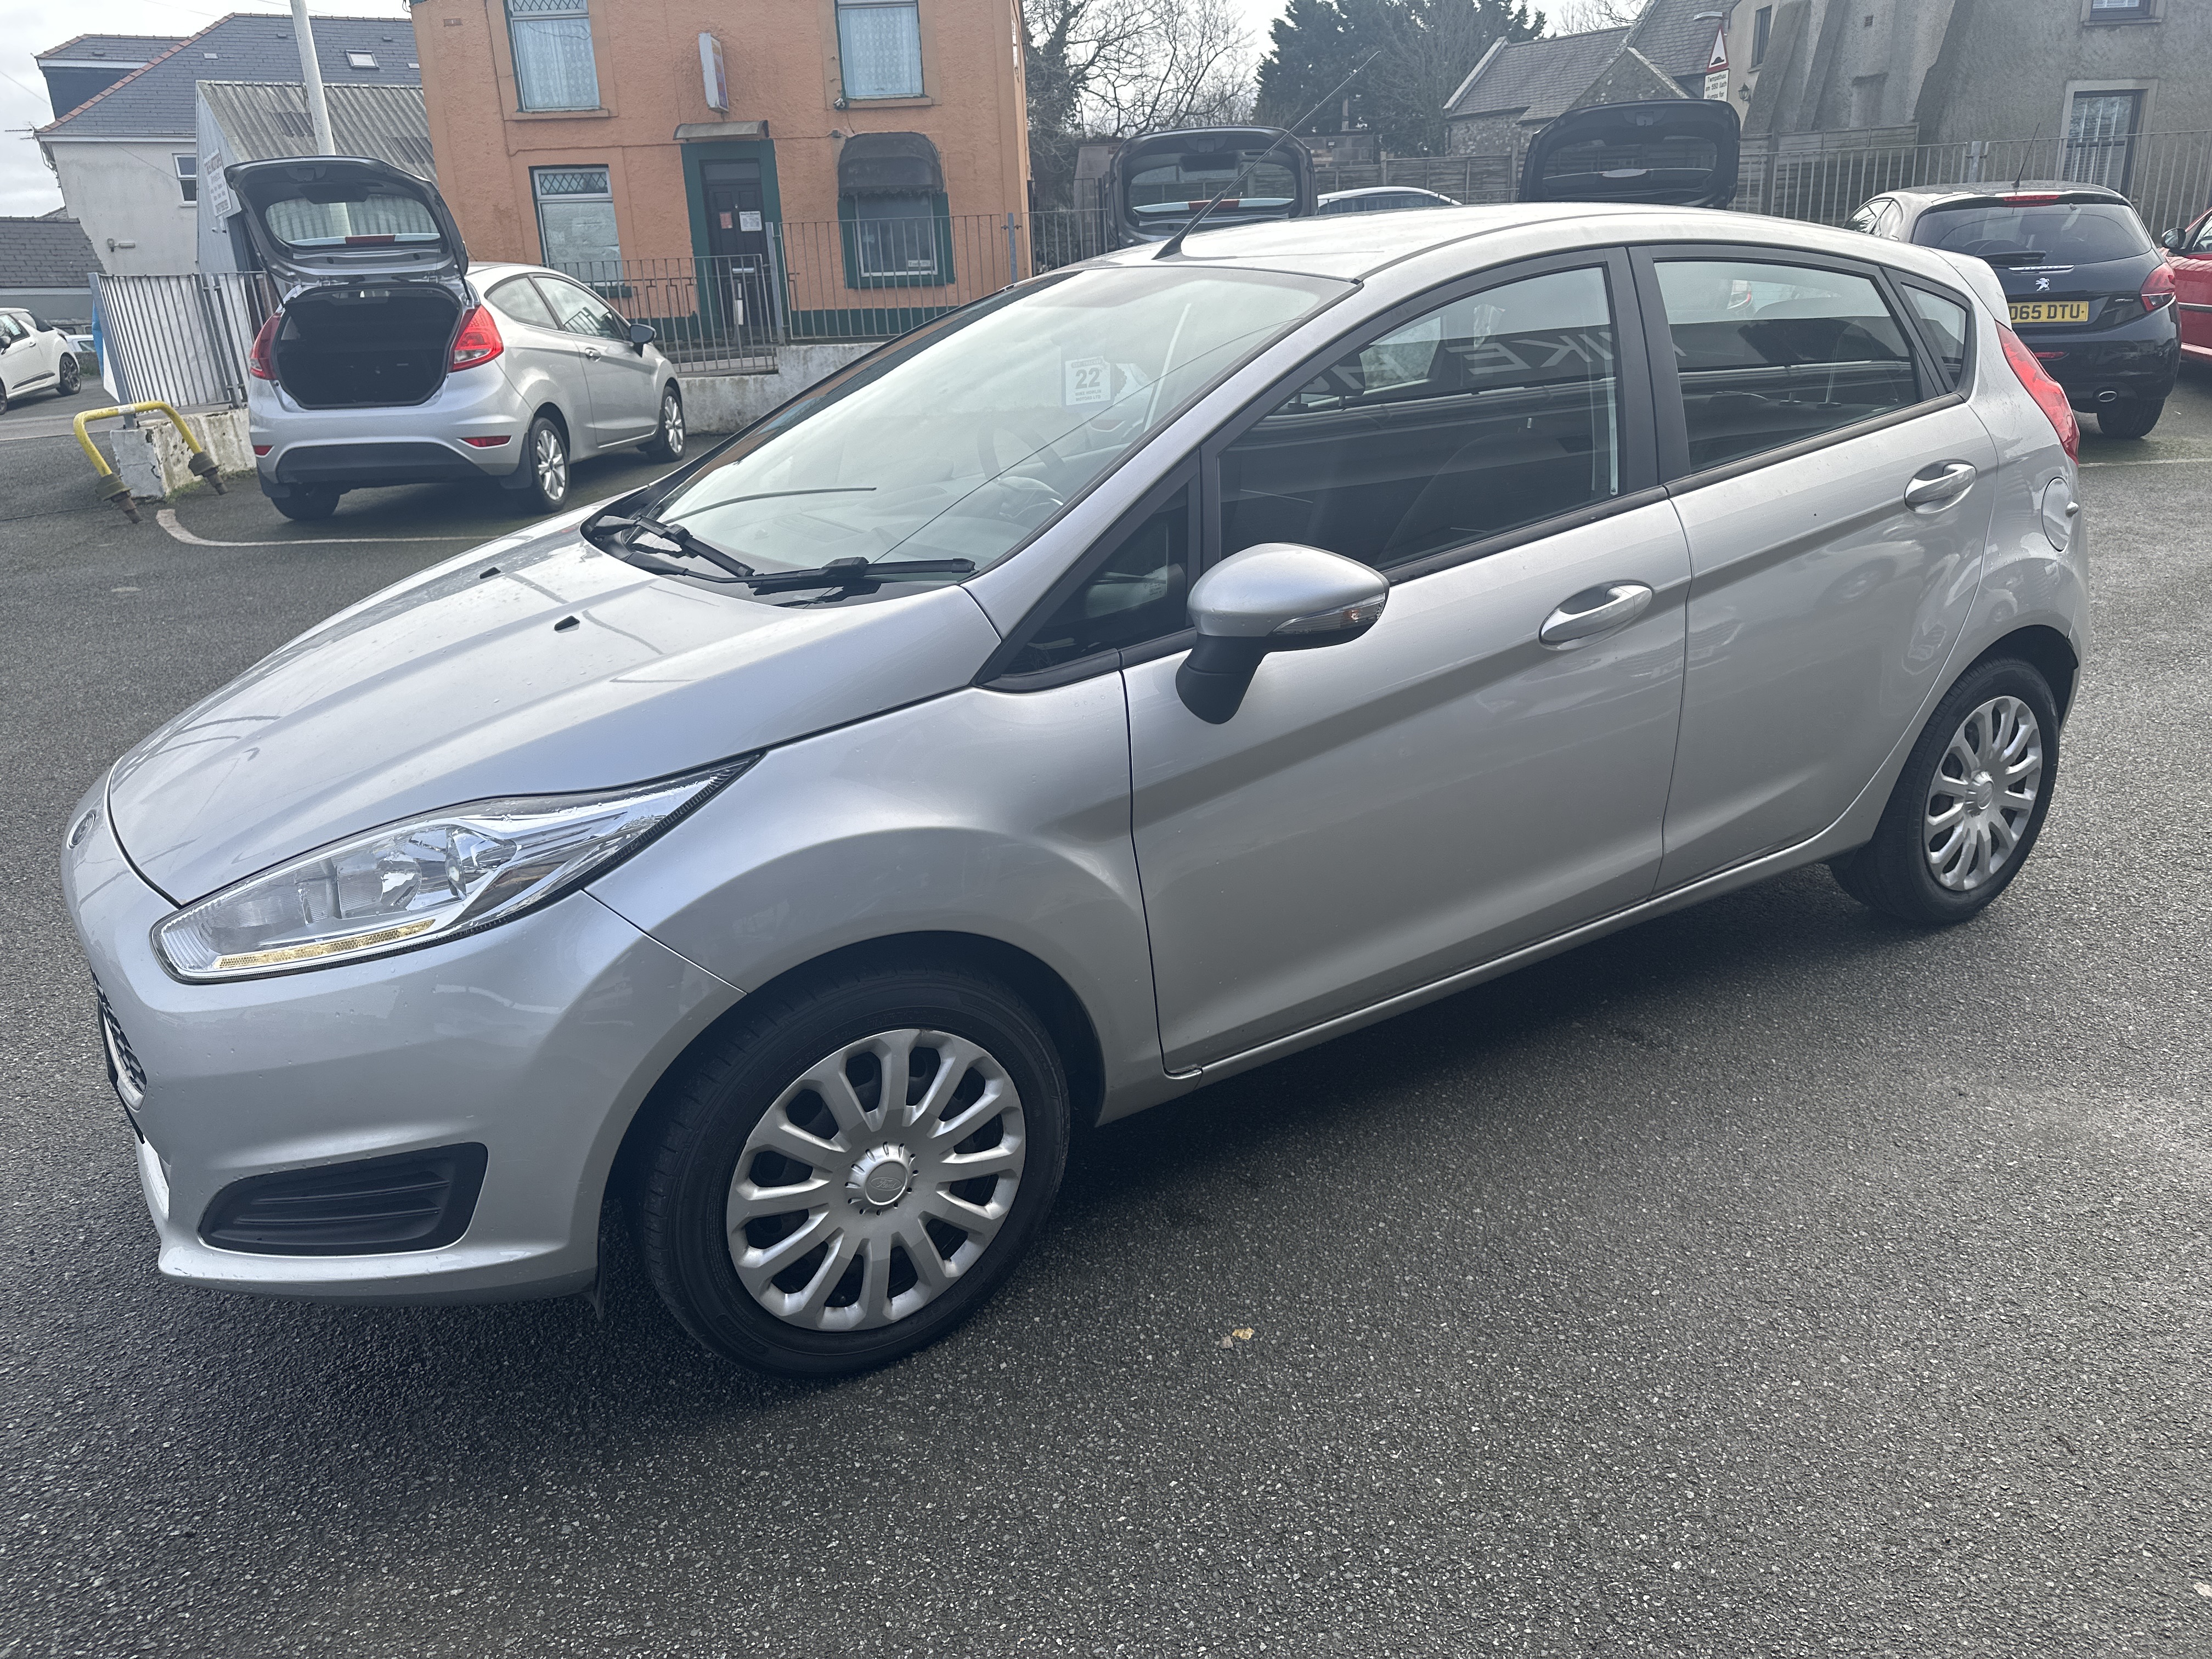 Ford FIESTA STYLE TDCI for sale at Mike Howlin Motor Sales Pembrokeshire